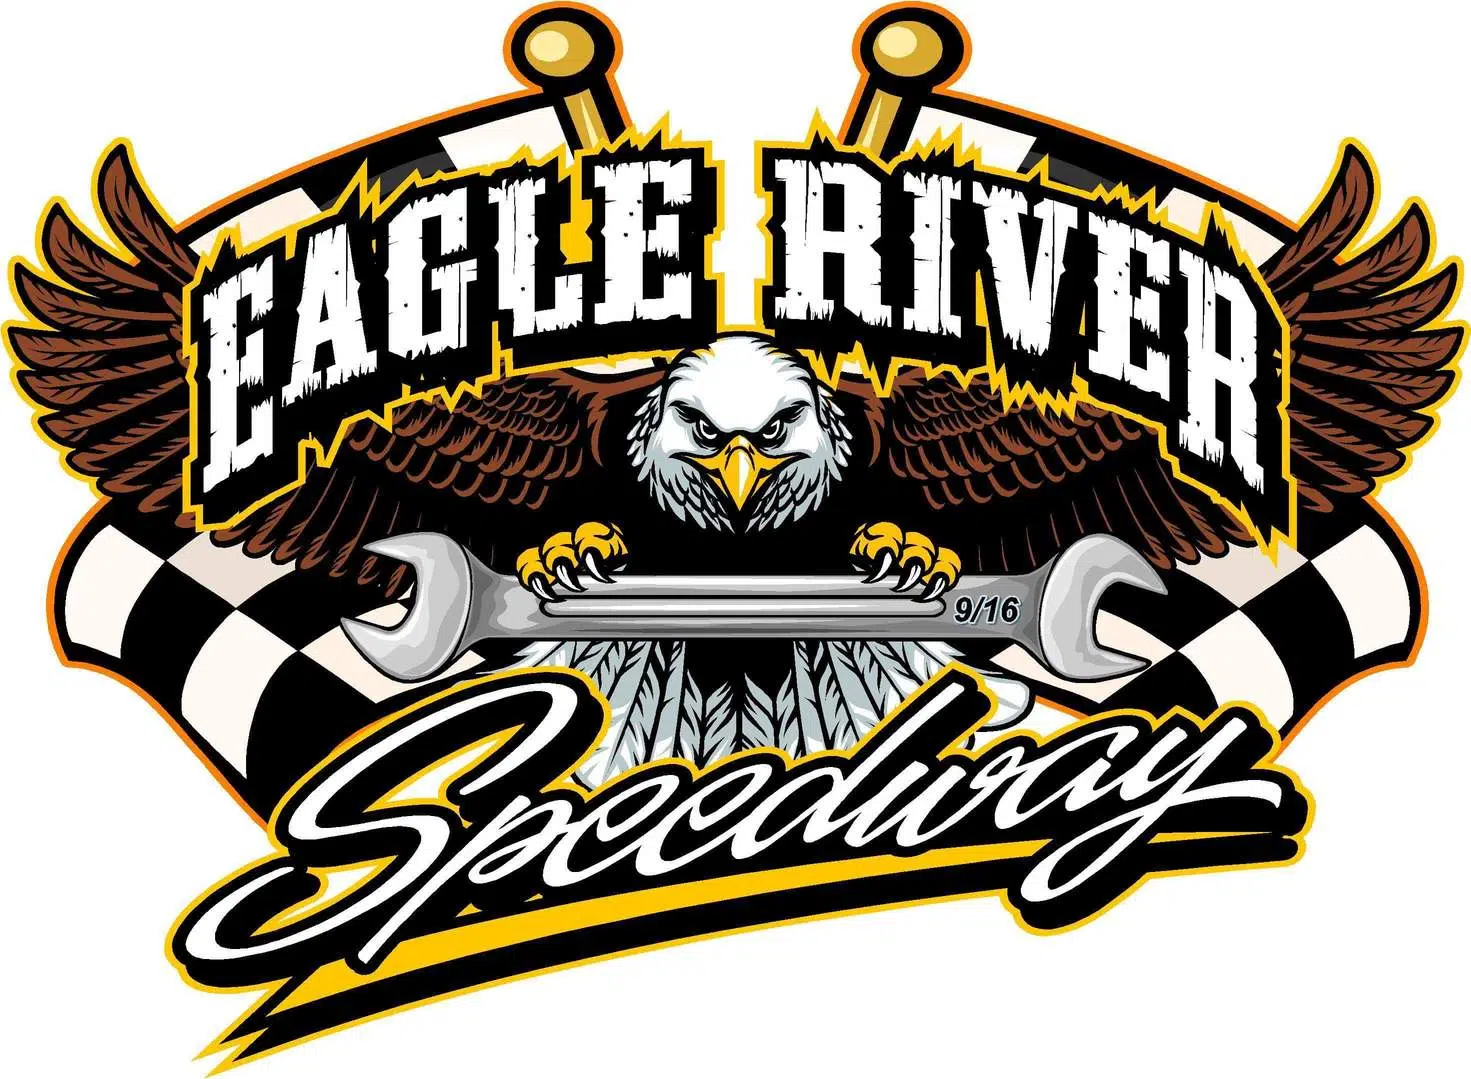 Eagle River Speedway Kicking Off Season With Sunday Races